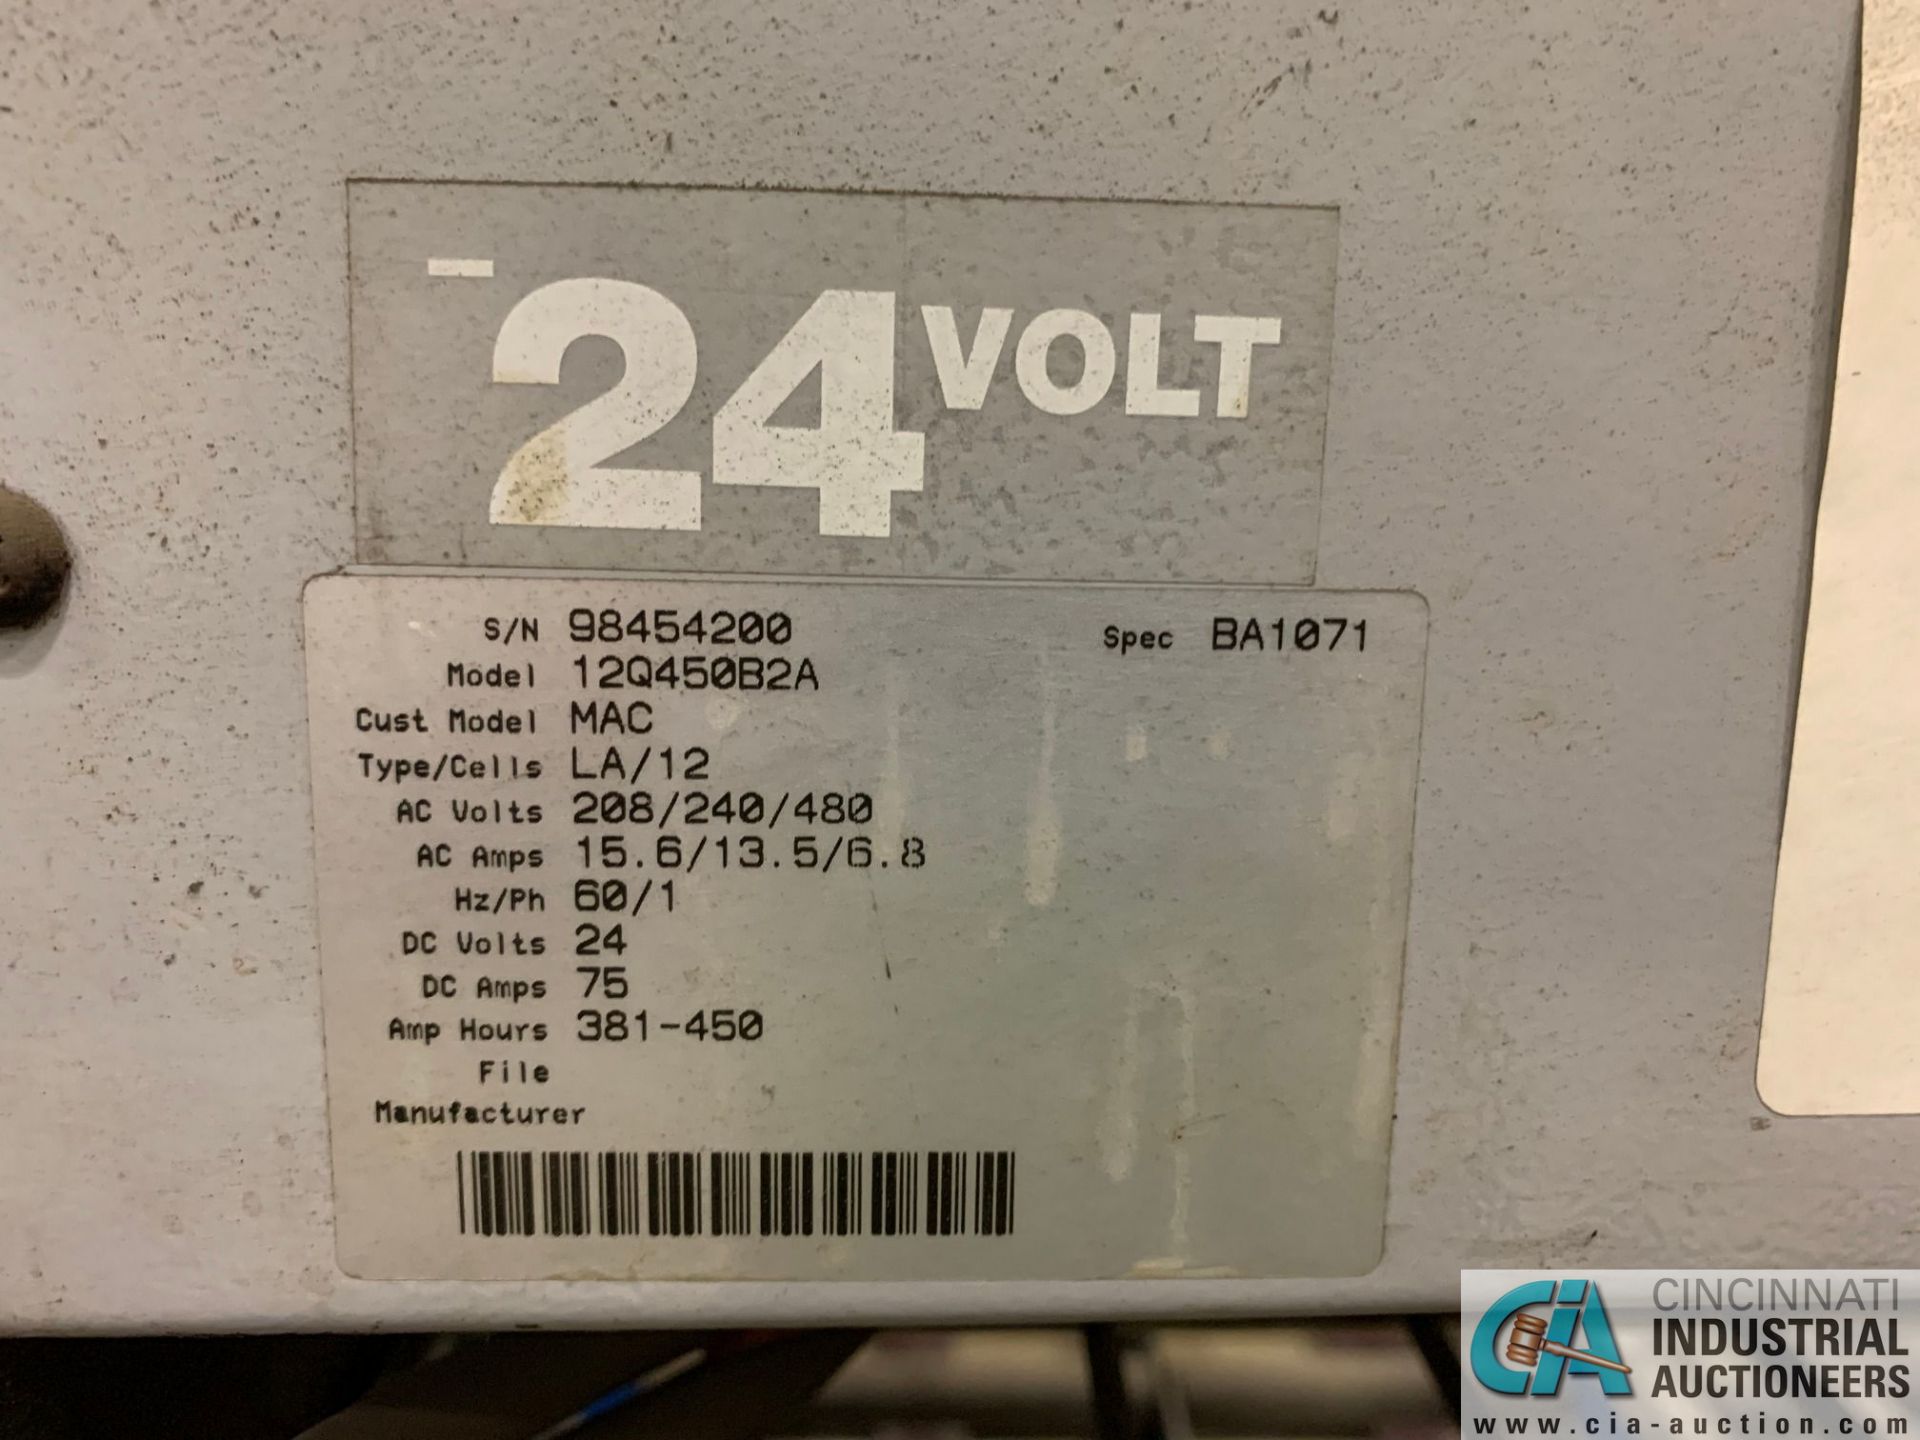 24-VOLT QUANTUM MODEL 12Q450B2A BATTERY CHARGER; S/N 98454200 (5400 OAKLEY INDUSTRIAL BLVD., - Image 2 of 3